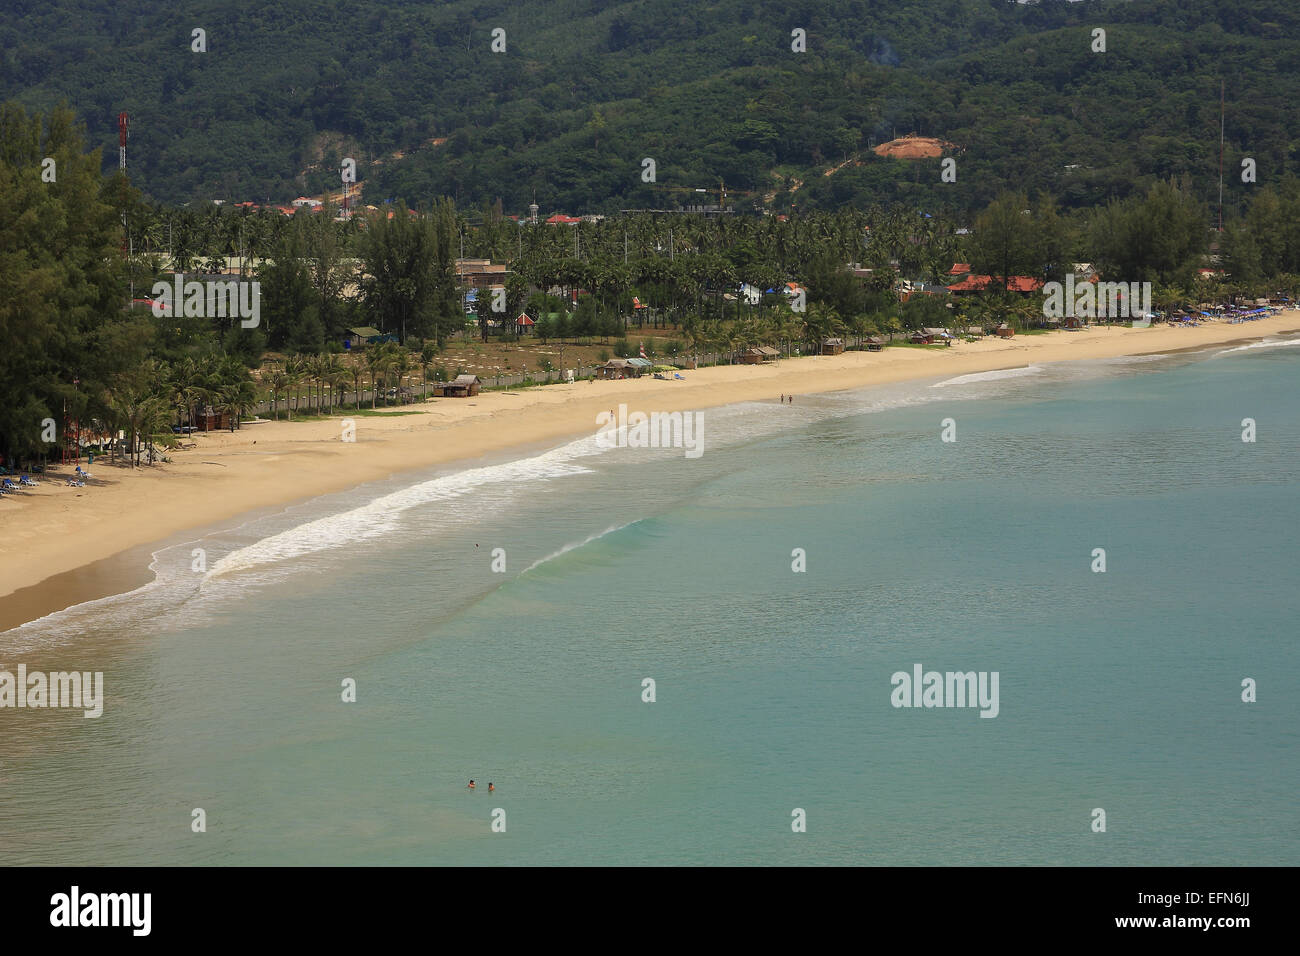 Kamala Beach Thailand High Resolution Stock Photography and Images - Alamy